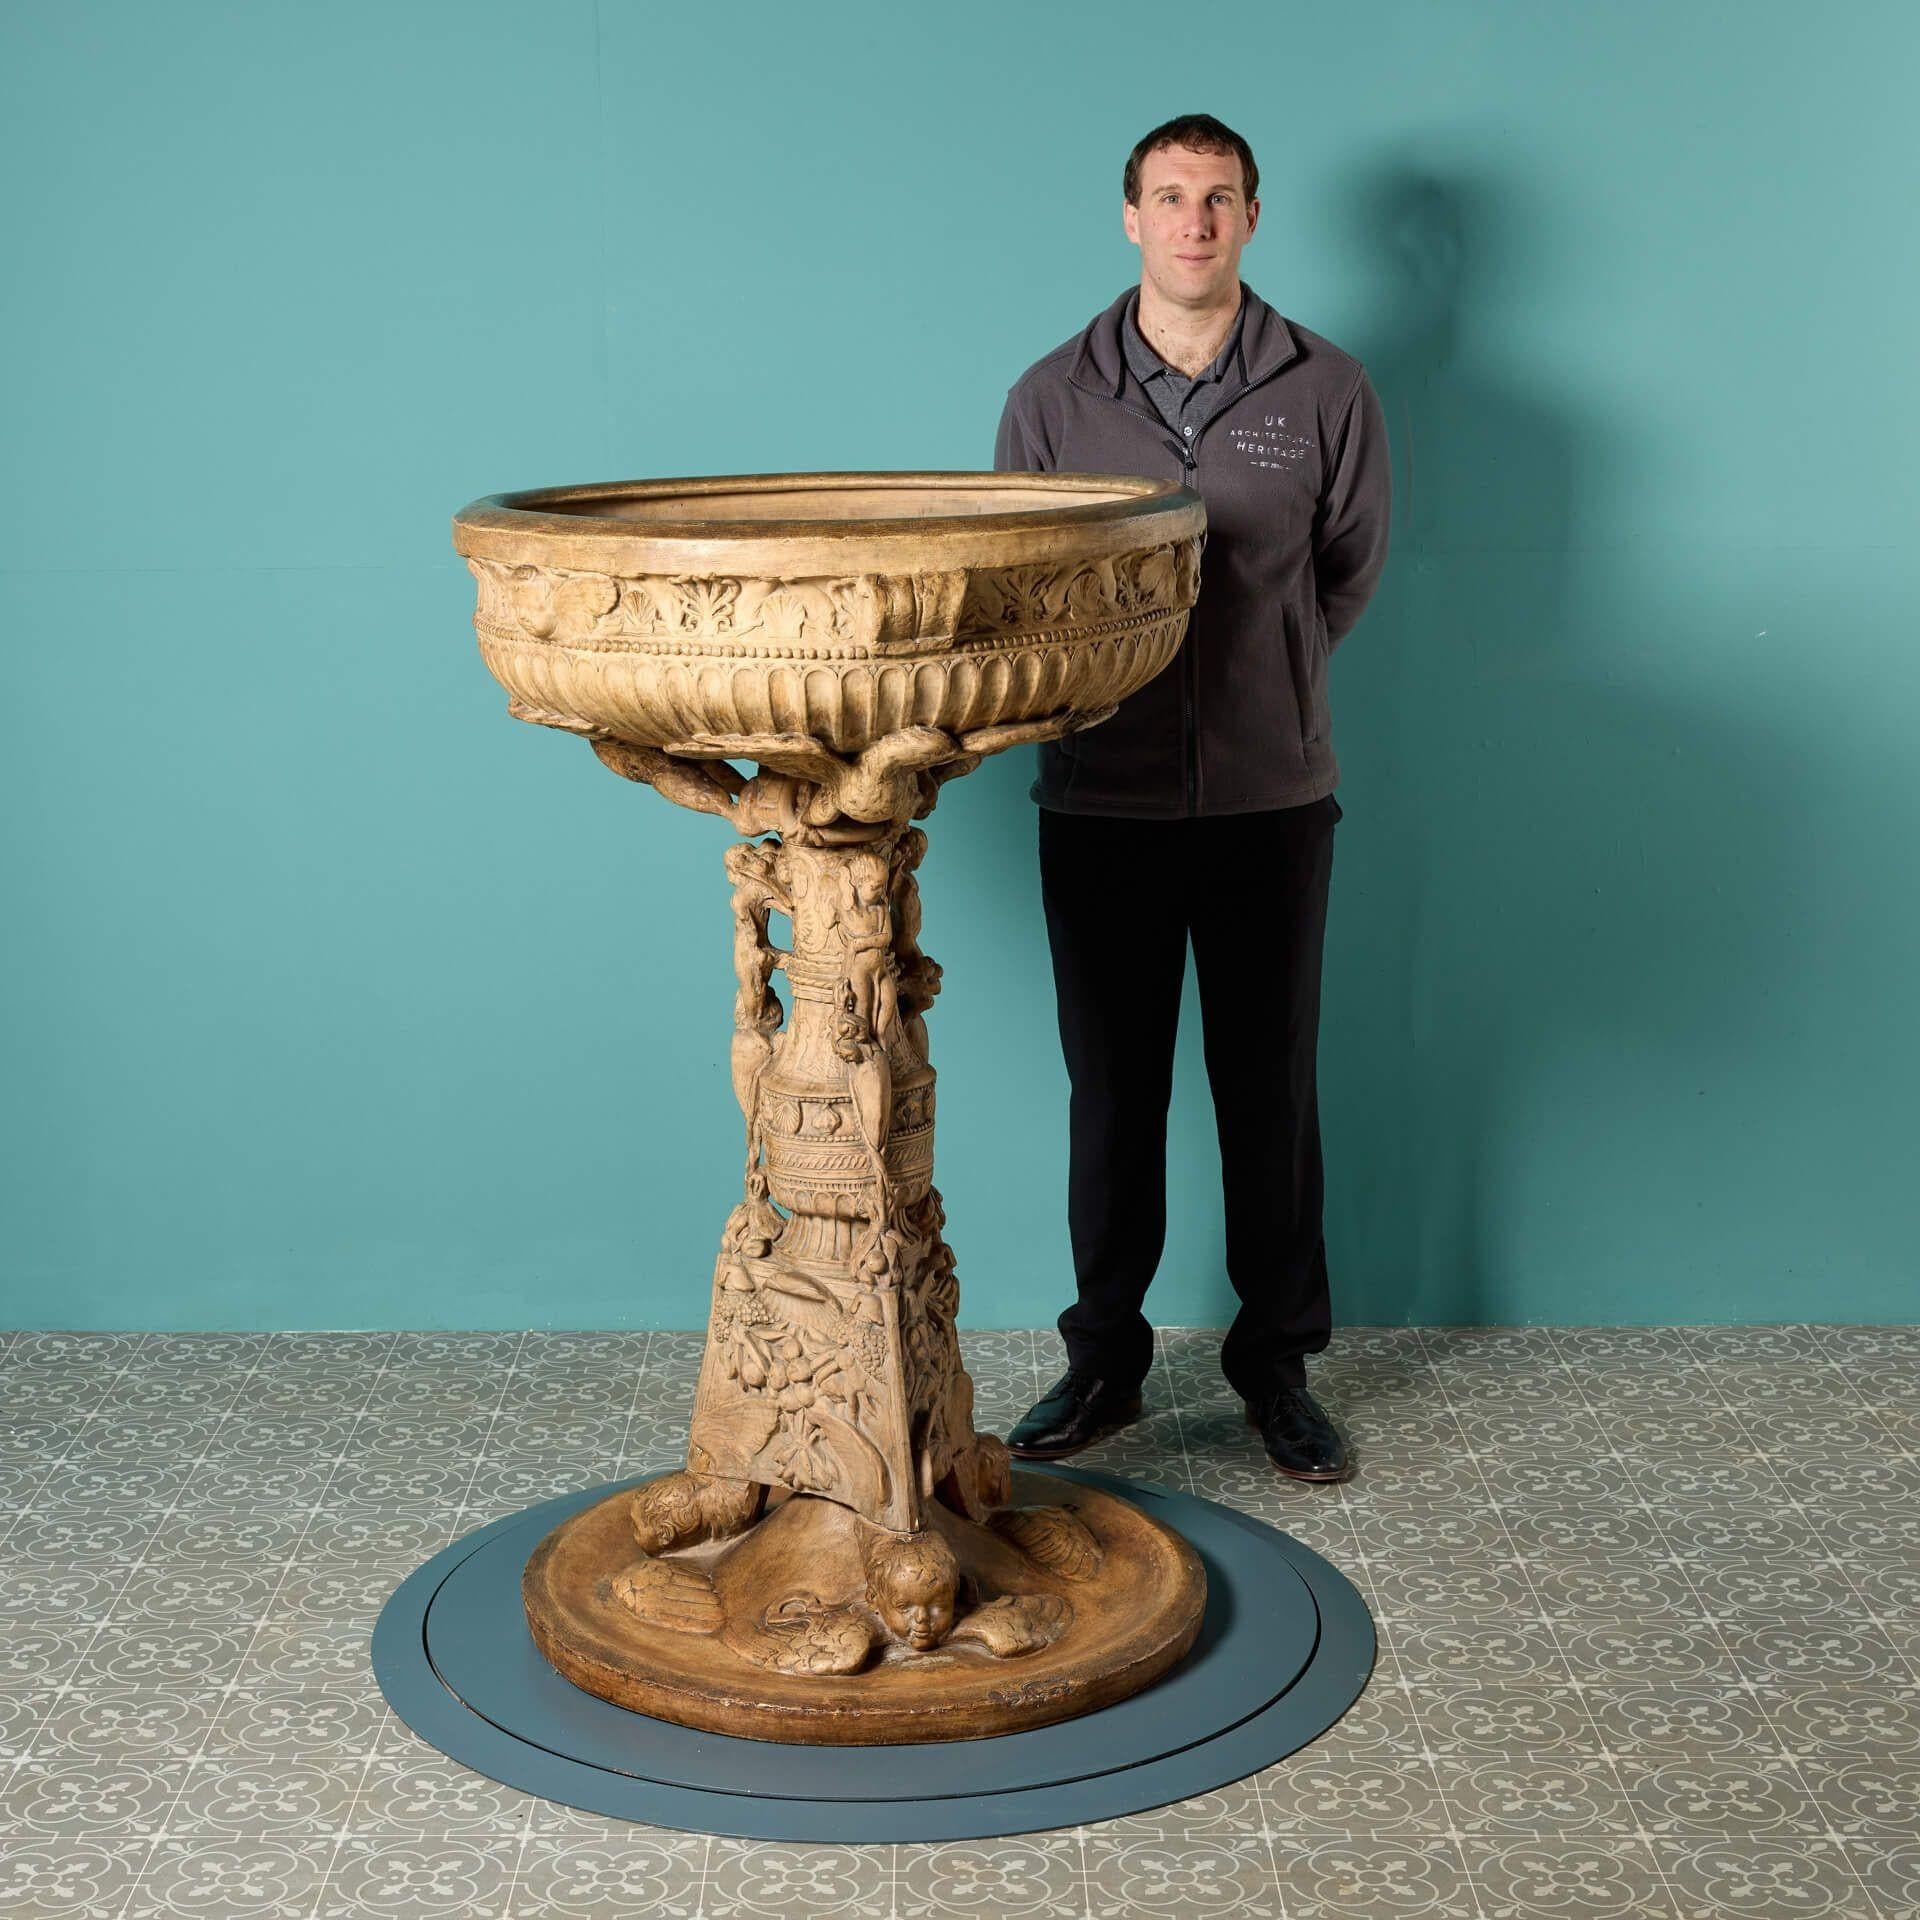 A spectacular large scale antique Italian terracotta water font after the antique. This detailed font of impressive scale is a museum copy of the original holy water basin in Cathedral of Siena, Italy, by sculptor Antonio Federighi of the Italian